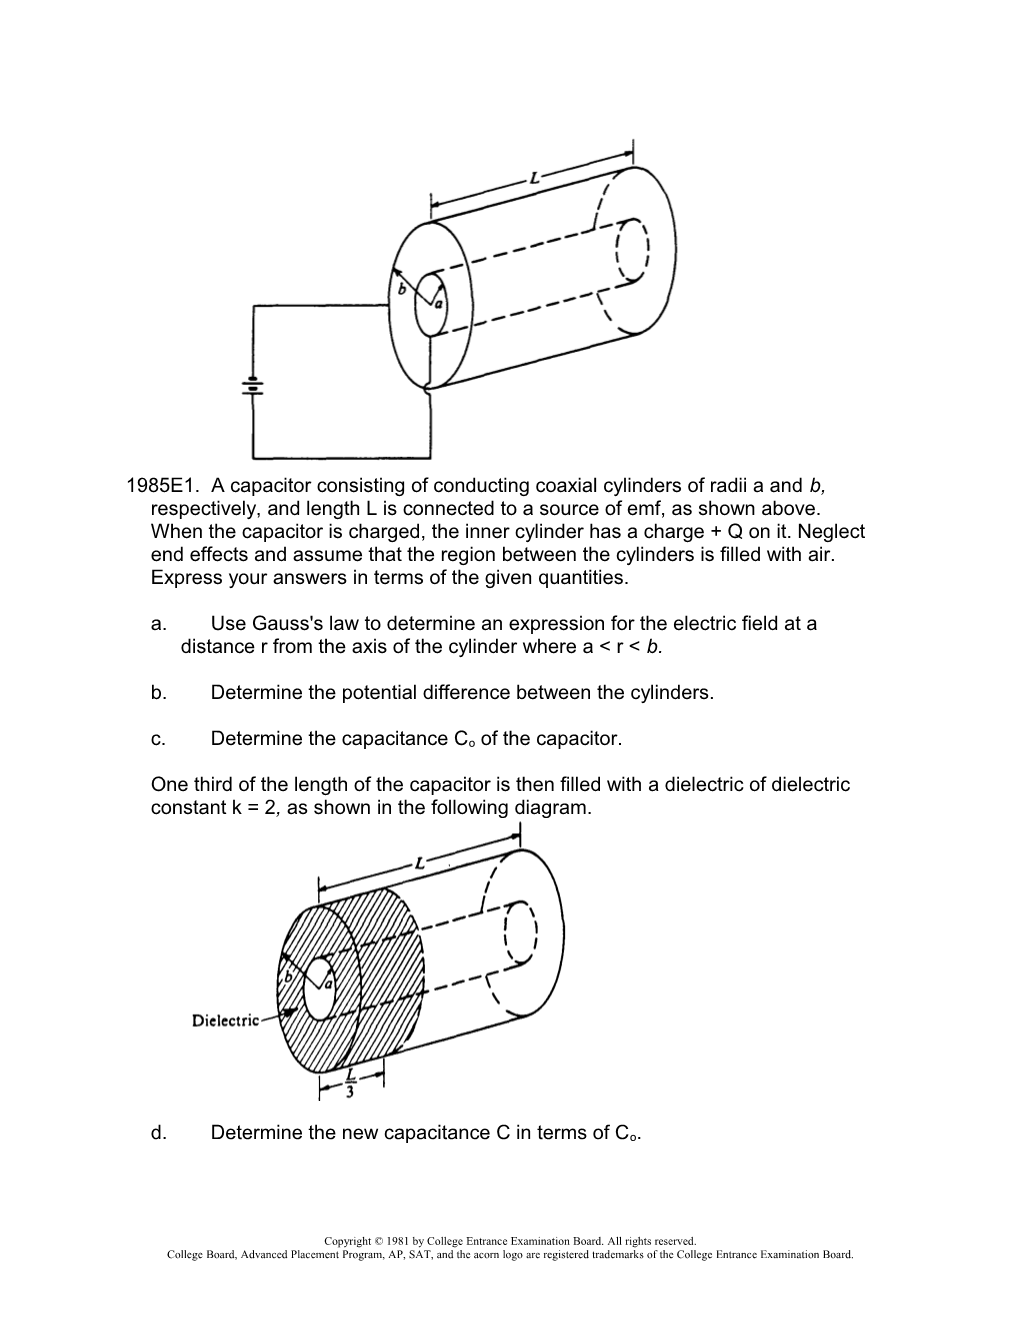 B. Determine the Potential Difference Between the Cylinders